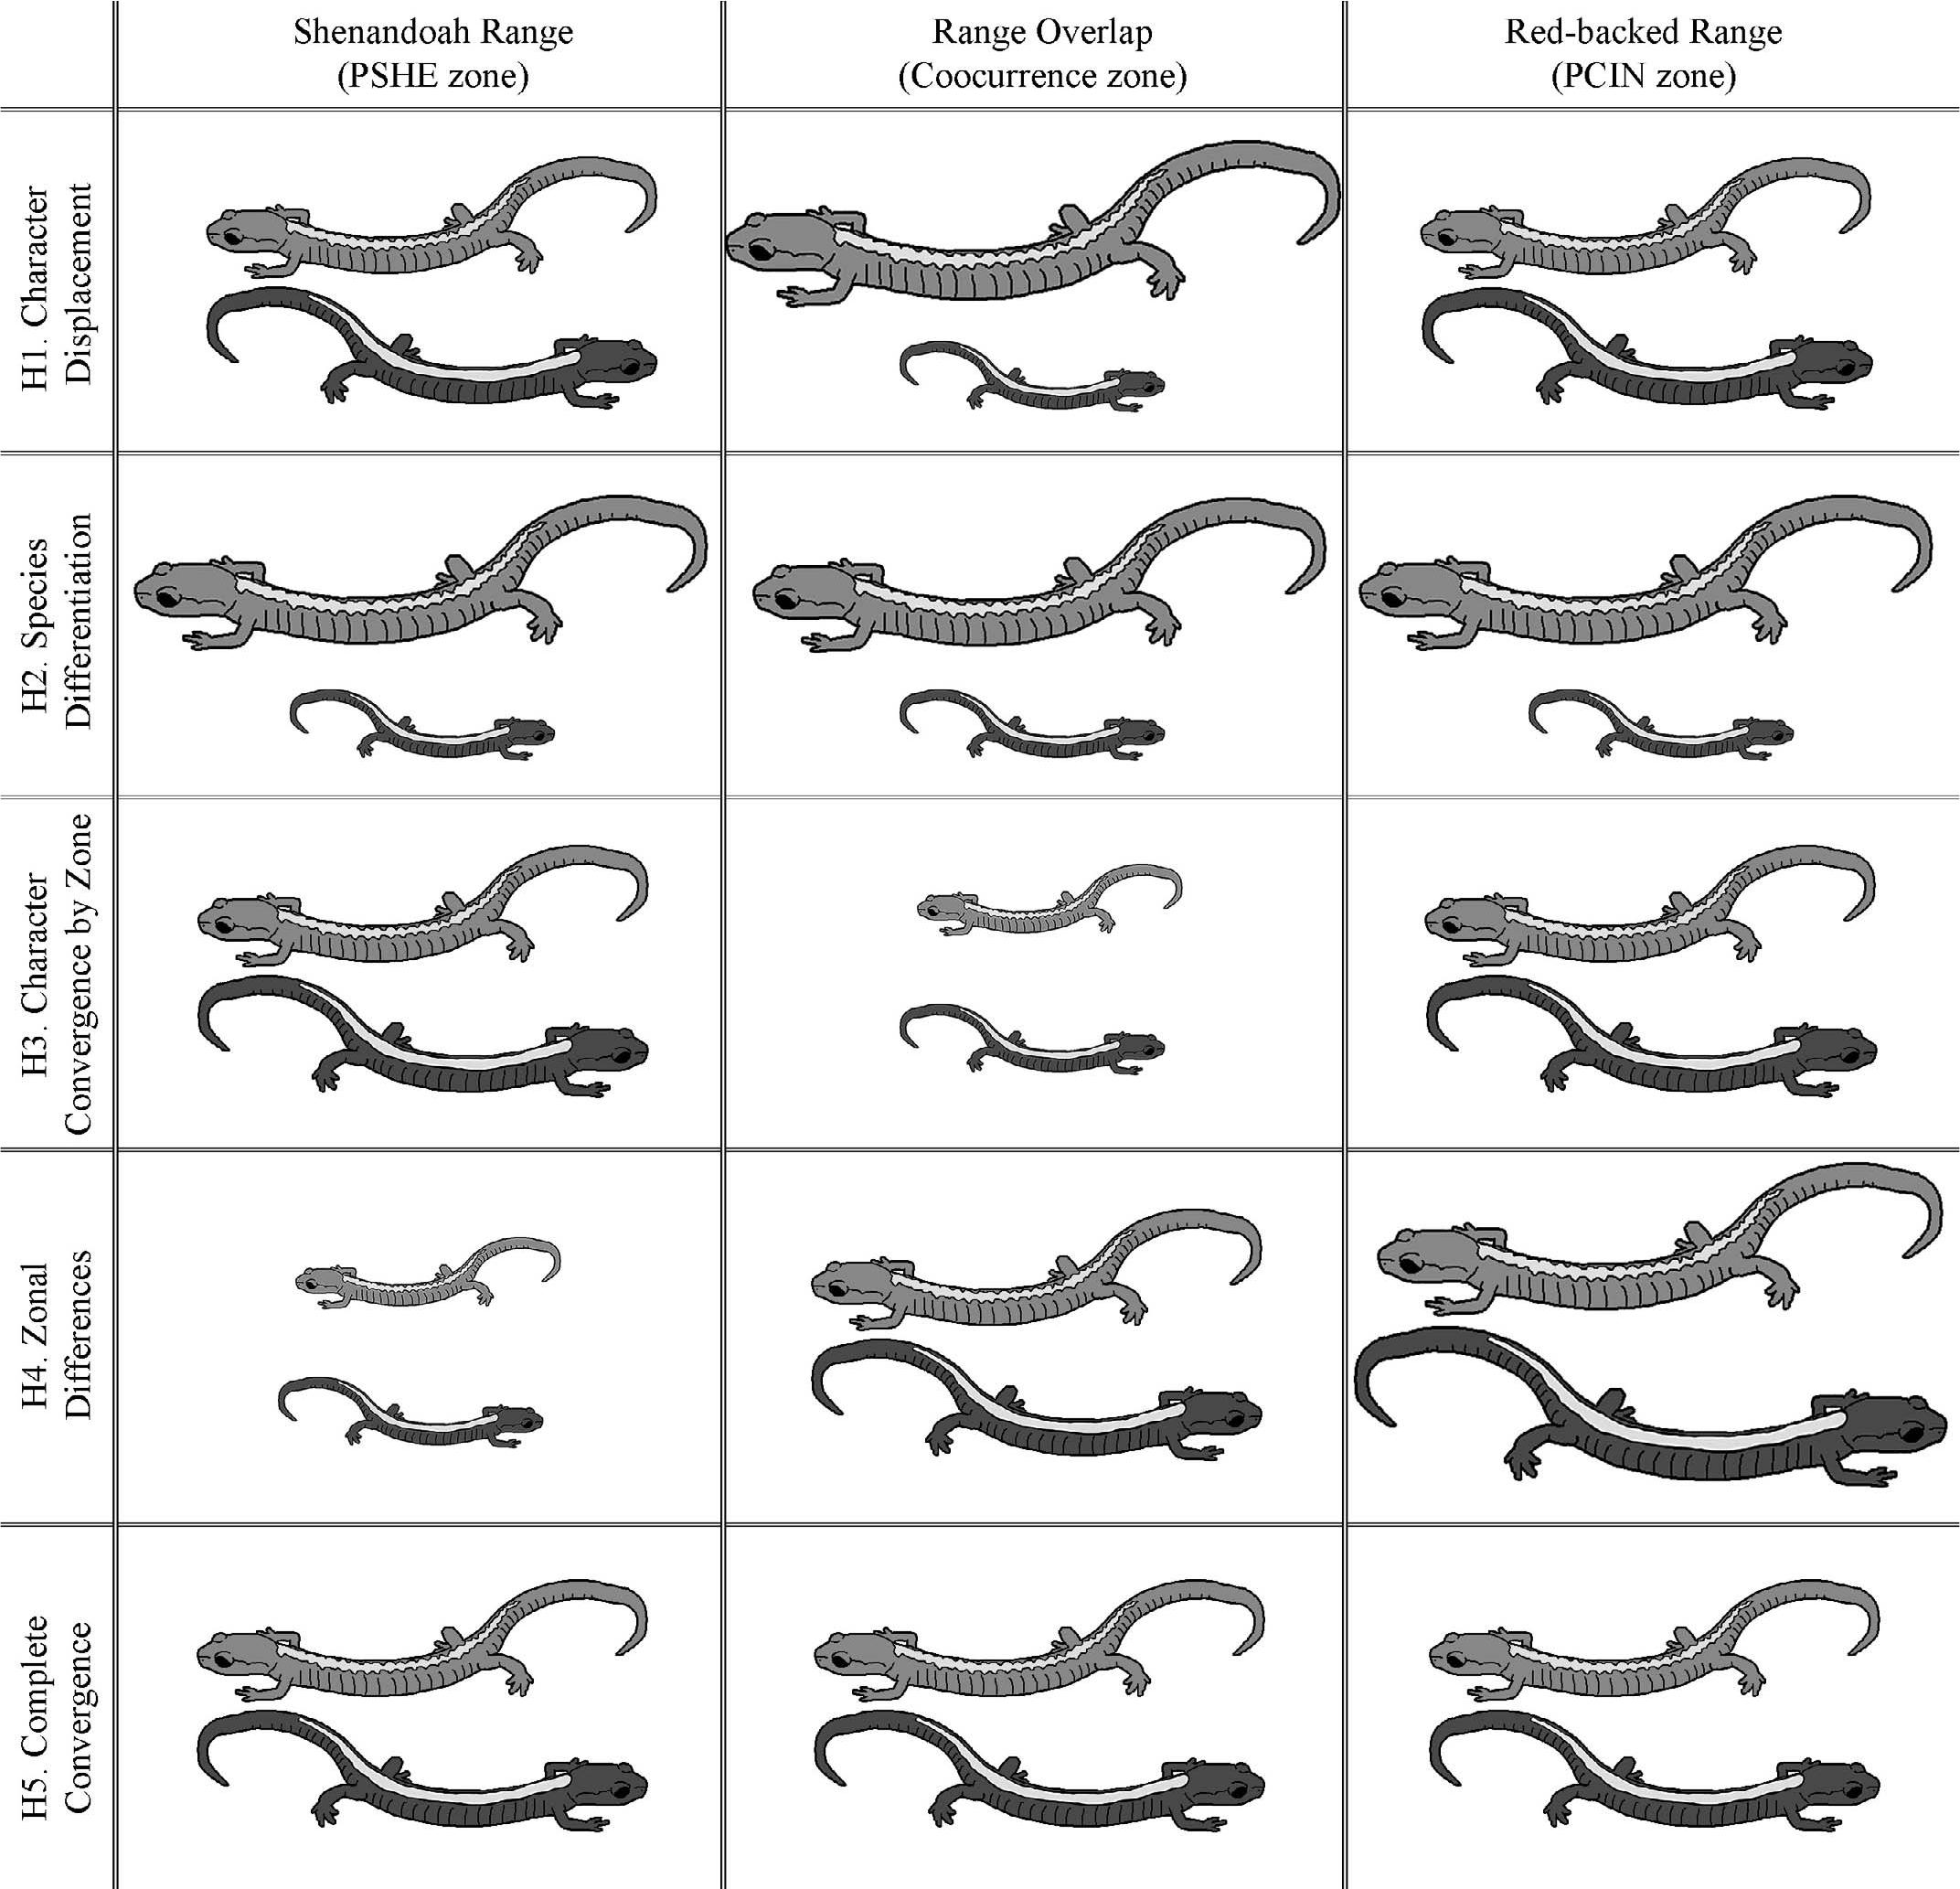 Factors Facilitating Co-occurrence at the Range Boundary of Shenandoah and  Red-Backed Salamanders